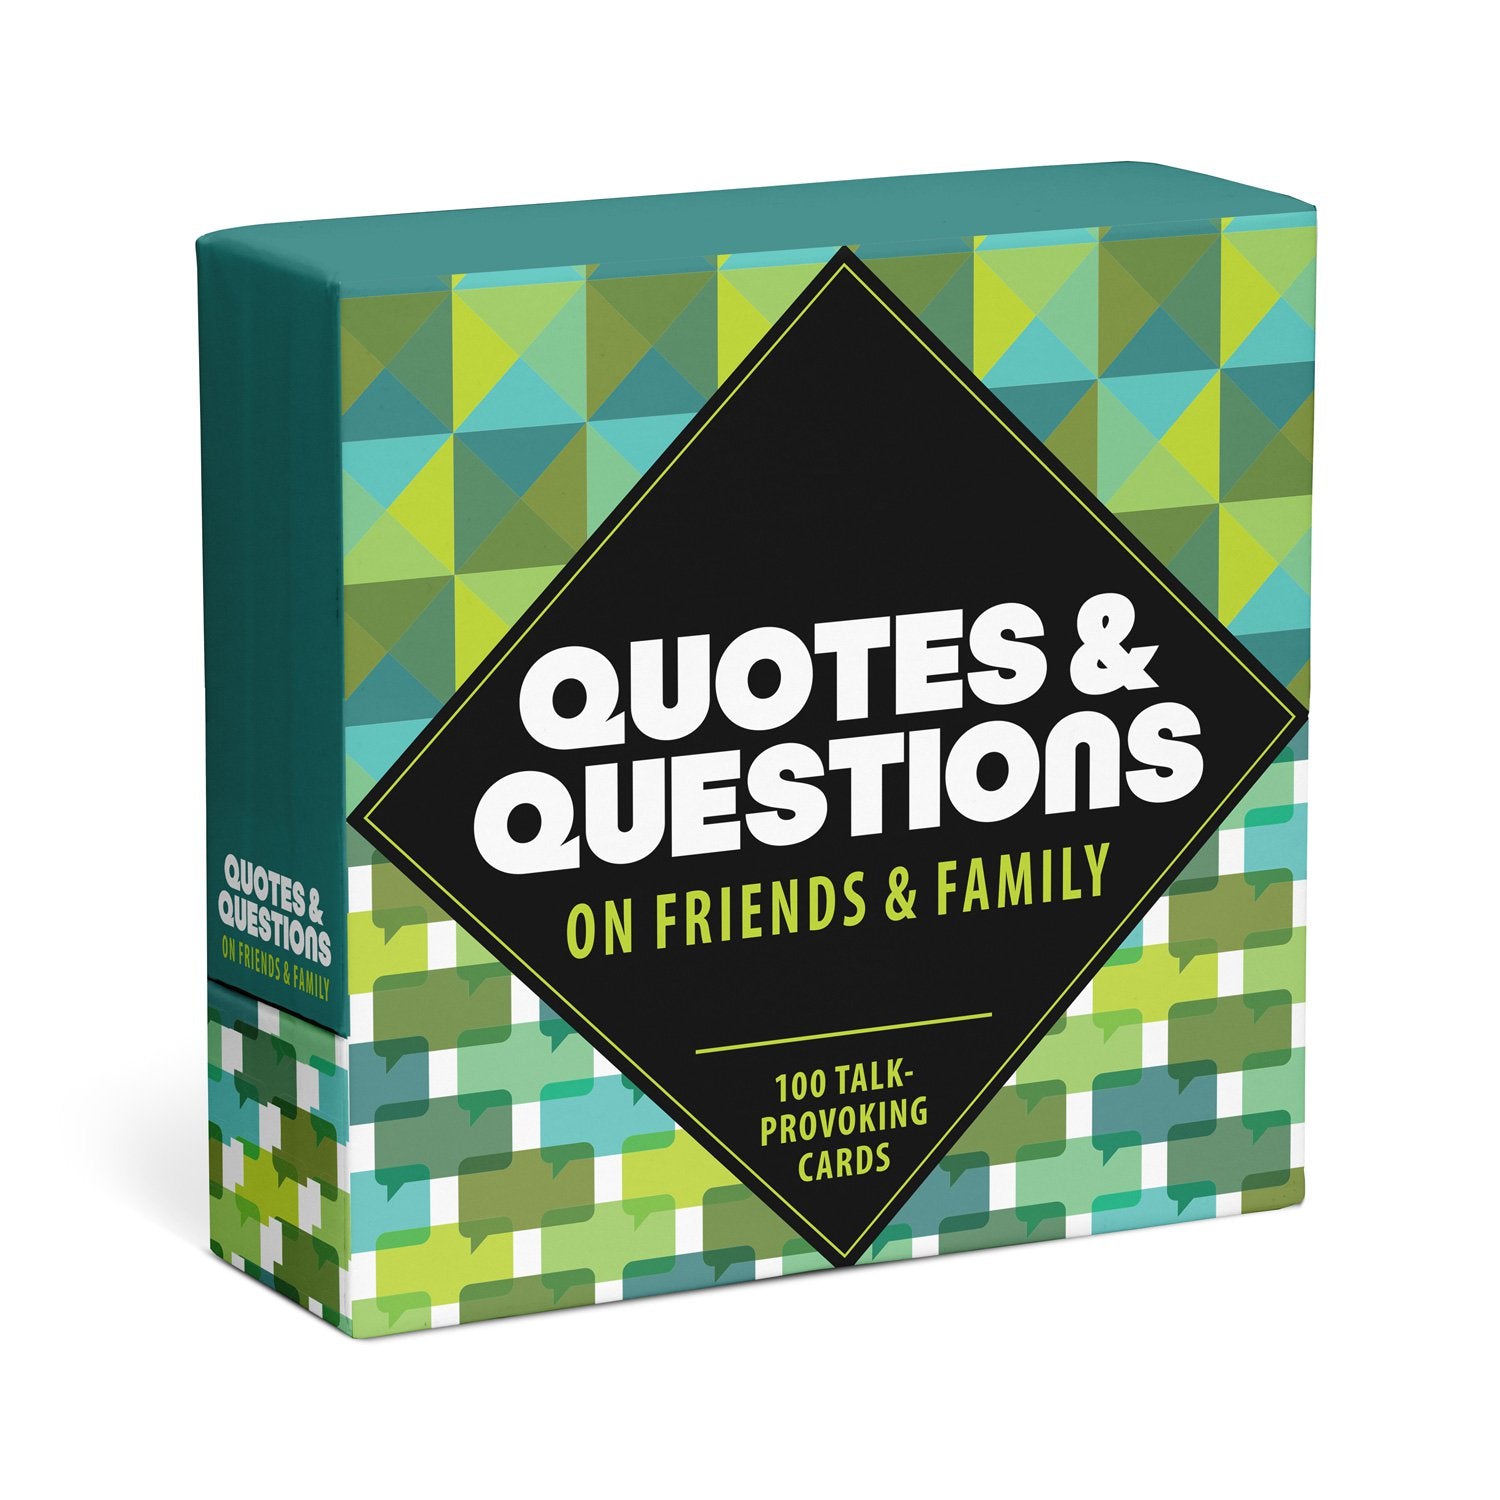 Quotes And Questions On Friends And Family: 100 Talk-Provoking Cards